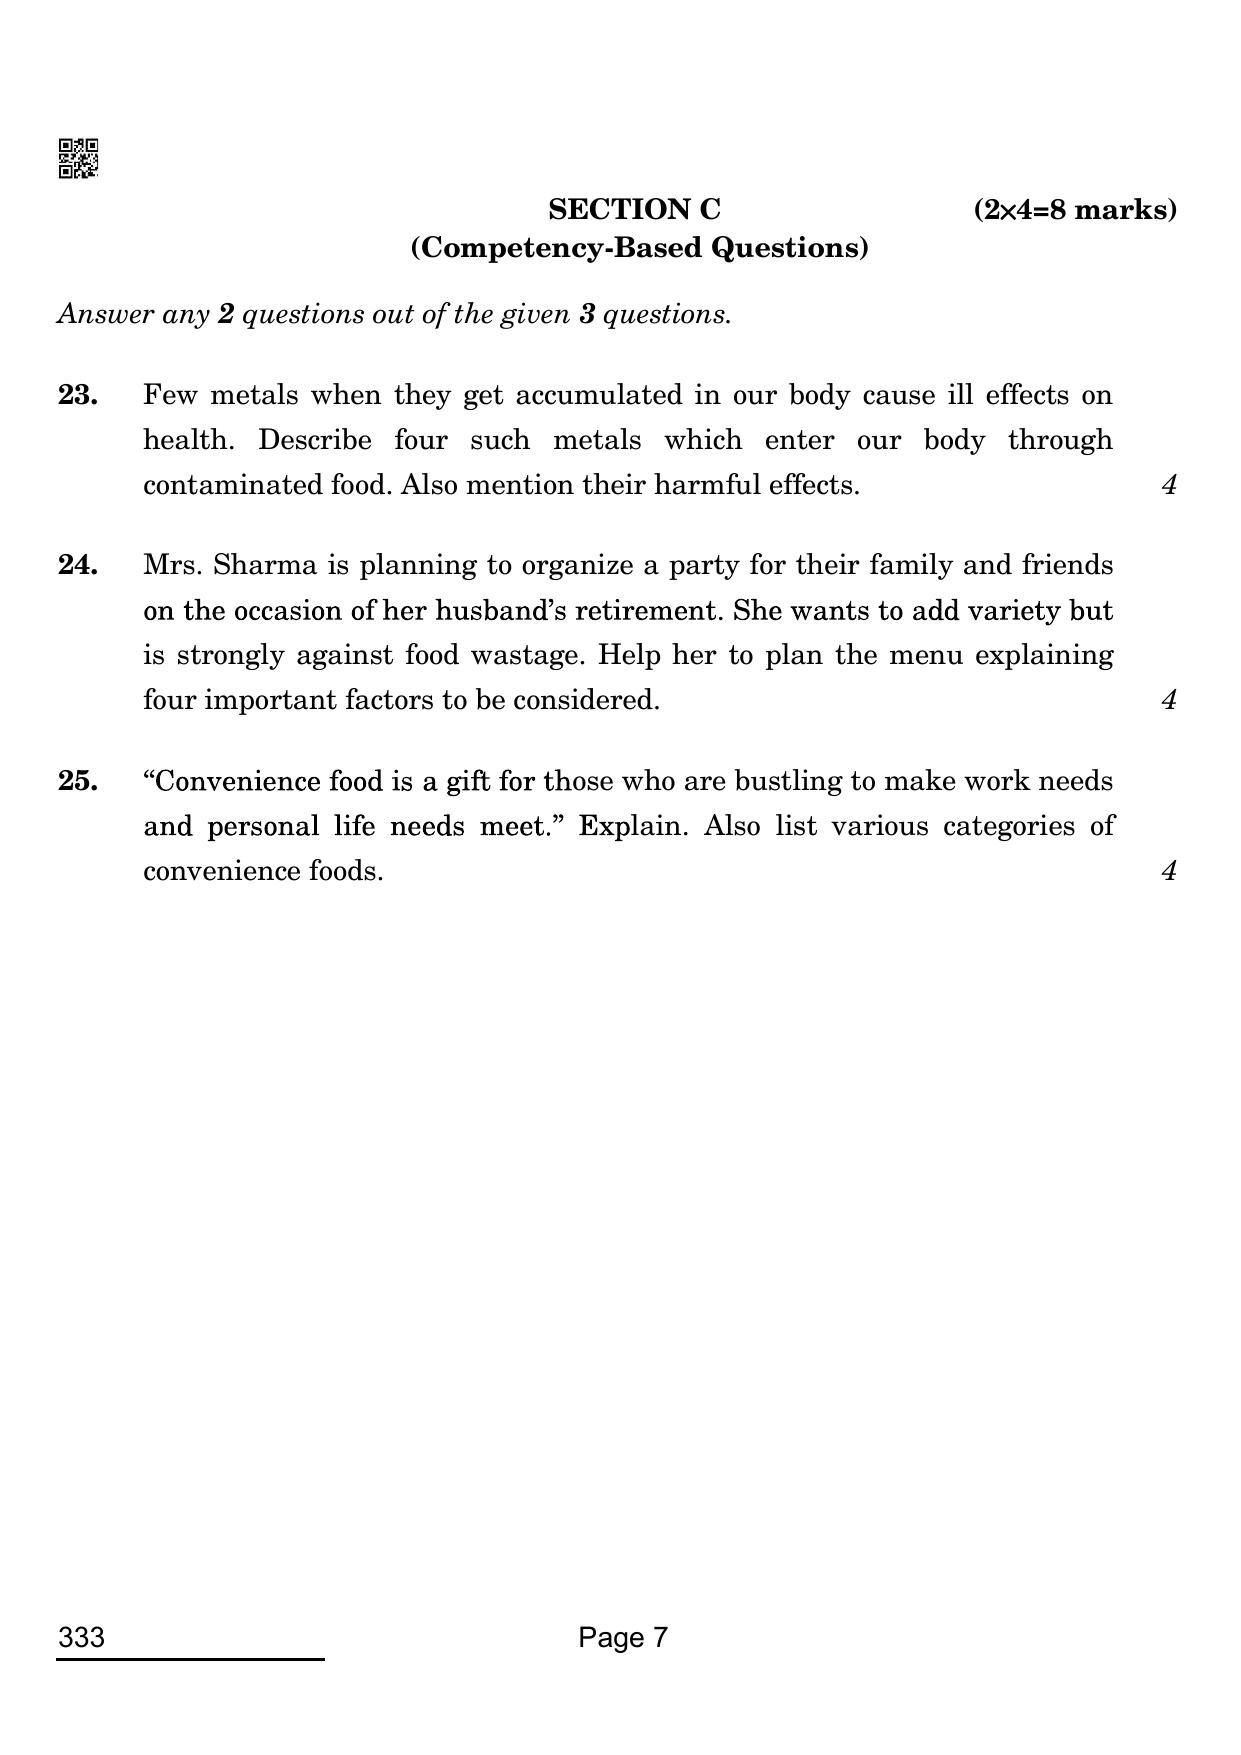 CBSE Class 12 333_food Production 2022 Question Paper - Page 7